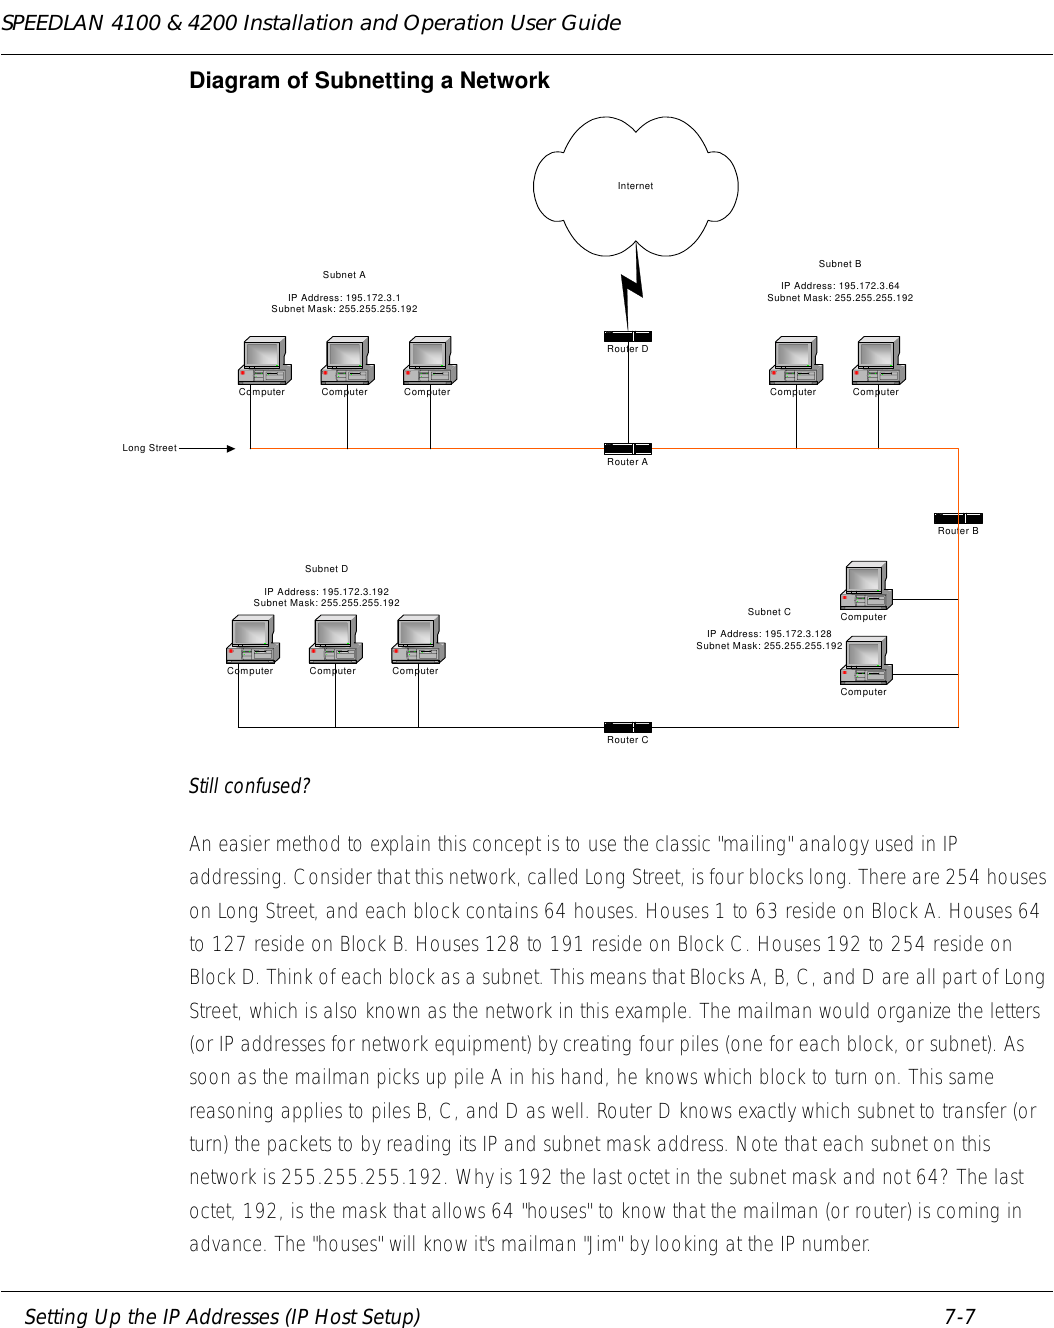 SPEEDLAN 4100 &amp; 4200 Installation and Operation User Guide     Setting Up the IP Addresses (IP Host Setup) 7-7                                                                                                                                                              Diagram of Subnetting a NetworkStill confused? An easier method to explain this concept is to use the classic &quot;mailing&quot; analogy used in IP addressing. Consider that this network, called Long Street, is four blocks long. There are 254 houses on Long Street, and each block contains 64 houses. Houses 1 to 63 reside on Block A. Houses 64 to 127 reside on Block B. Houses 128 to 191 reside on Block C. Houses 192 to 254 reside on Block D. Think of each block as a subnet. This means that Blocks A, B, C, and D are all part of Long Street, which is also known as the network in this example. The mailman would organize the letters (or IP addresses for network equipment) by creating four piles (one for each block, or subnet). As soon as the mailman picks up pile A in his hand, he knows which block to turn on. This same reasoning applies to piles B, C, and D as well. Router D knows exactly which subnet to transfer (or turn) the packets to by reading its IP and subnet mask address. Note that each subnet on this network is 255.255.255.192. Why is 192 the last octet in the subnet mask and not 64? The last octet, 192, is the mask that allows 64 &quot;houses&quot; to know that the mailman (or router) is coming in advance. The &quot;houses&quot; will know it&apos;s mailman &quot;Jim&quot; by looking at the IP number. InternetRouter DRouter BRouter CComputer ComputerComputerComputerComputer Computer ComputerComputer Computer ComputerLong StreetSubnet AIP Address: 195.172.3.1Subnet Mask: 255.255.255.192Subnet BIP Address: 195.172.3.64Subnet Mask: 255.255.255.192Subnet CIP Address: 195.172.3.128Subnet Mask: 255.255.255.192Subnet DIP Address: 195.172.3.192Subnet Mask: 255.255.255.192Router A